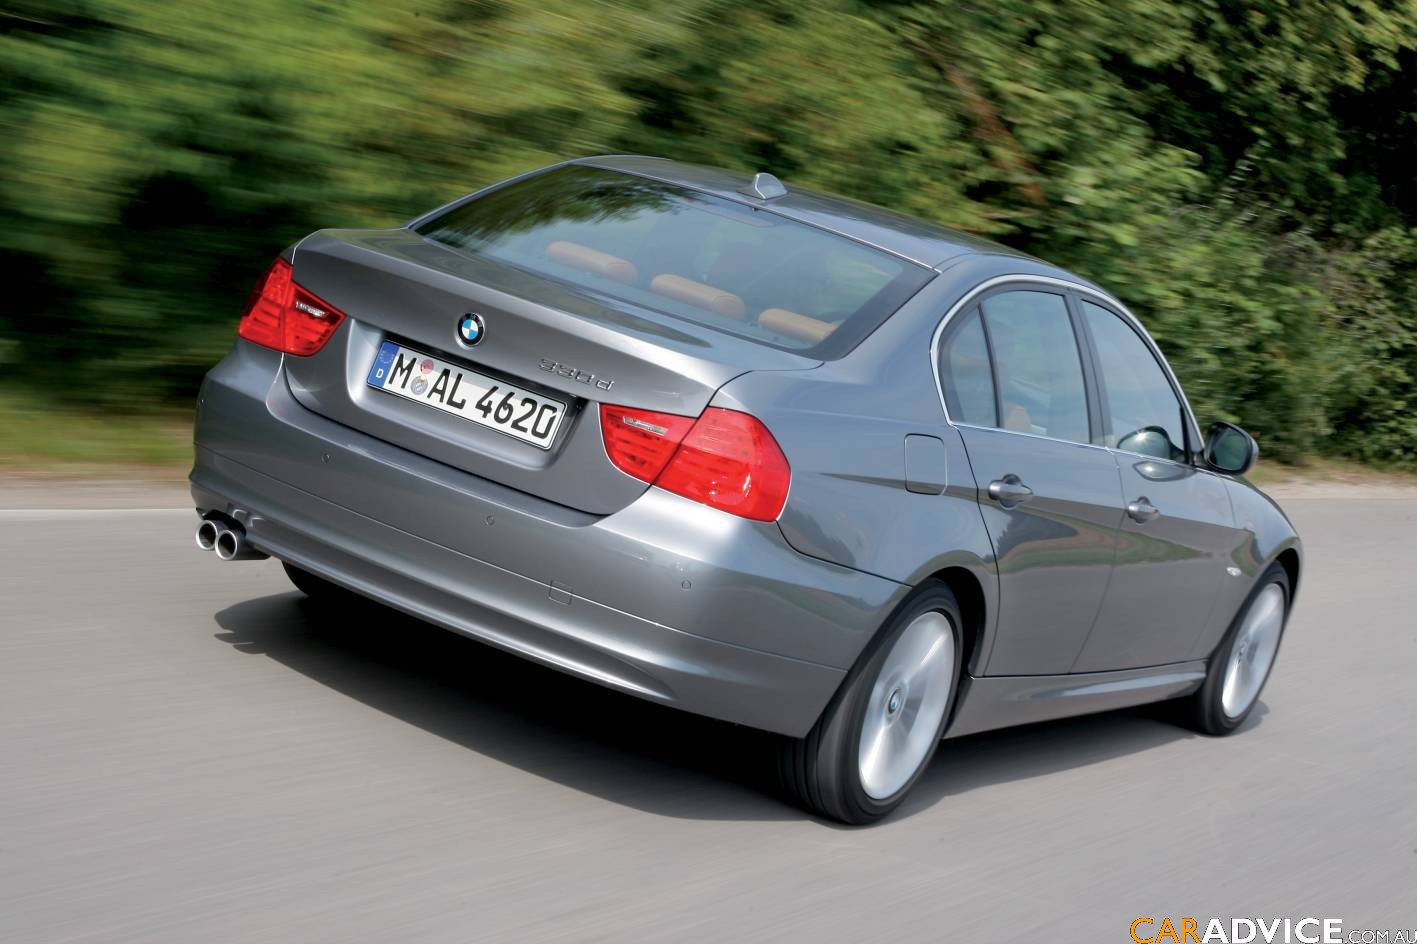 The new BMW 330d joins the just revealed new look BMW 3 Series sedan line-up